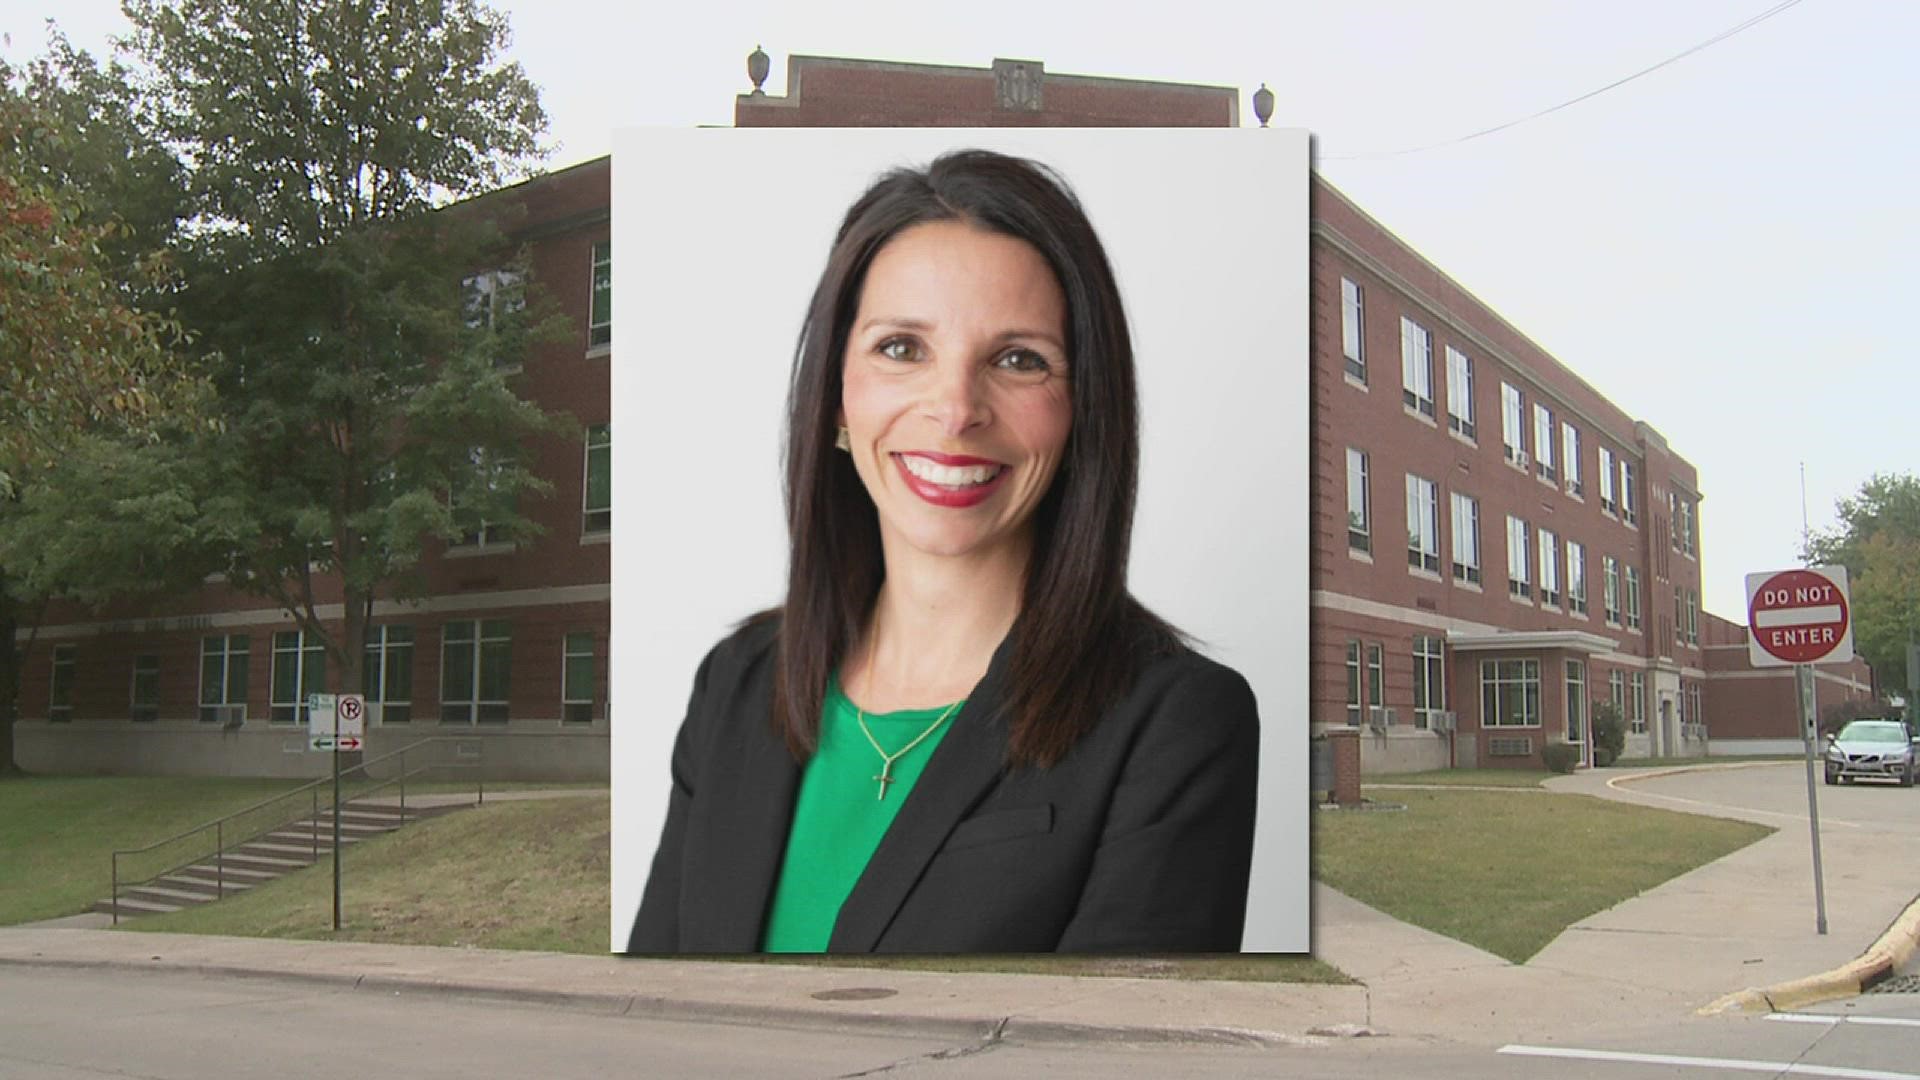 In a news release issued from the Diocese of Peoria's Office of Catholic Schools, officials announce that the Alleman principal has resigned effective immediately.